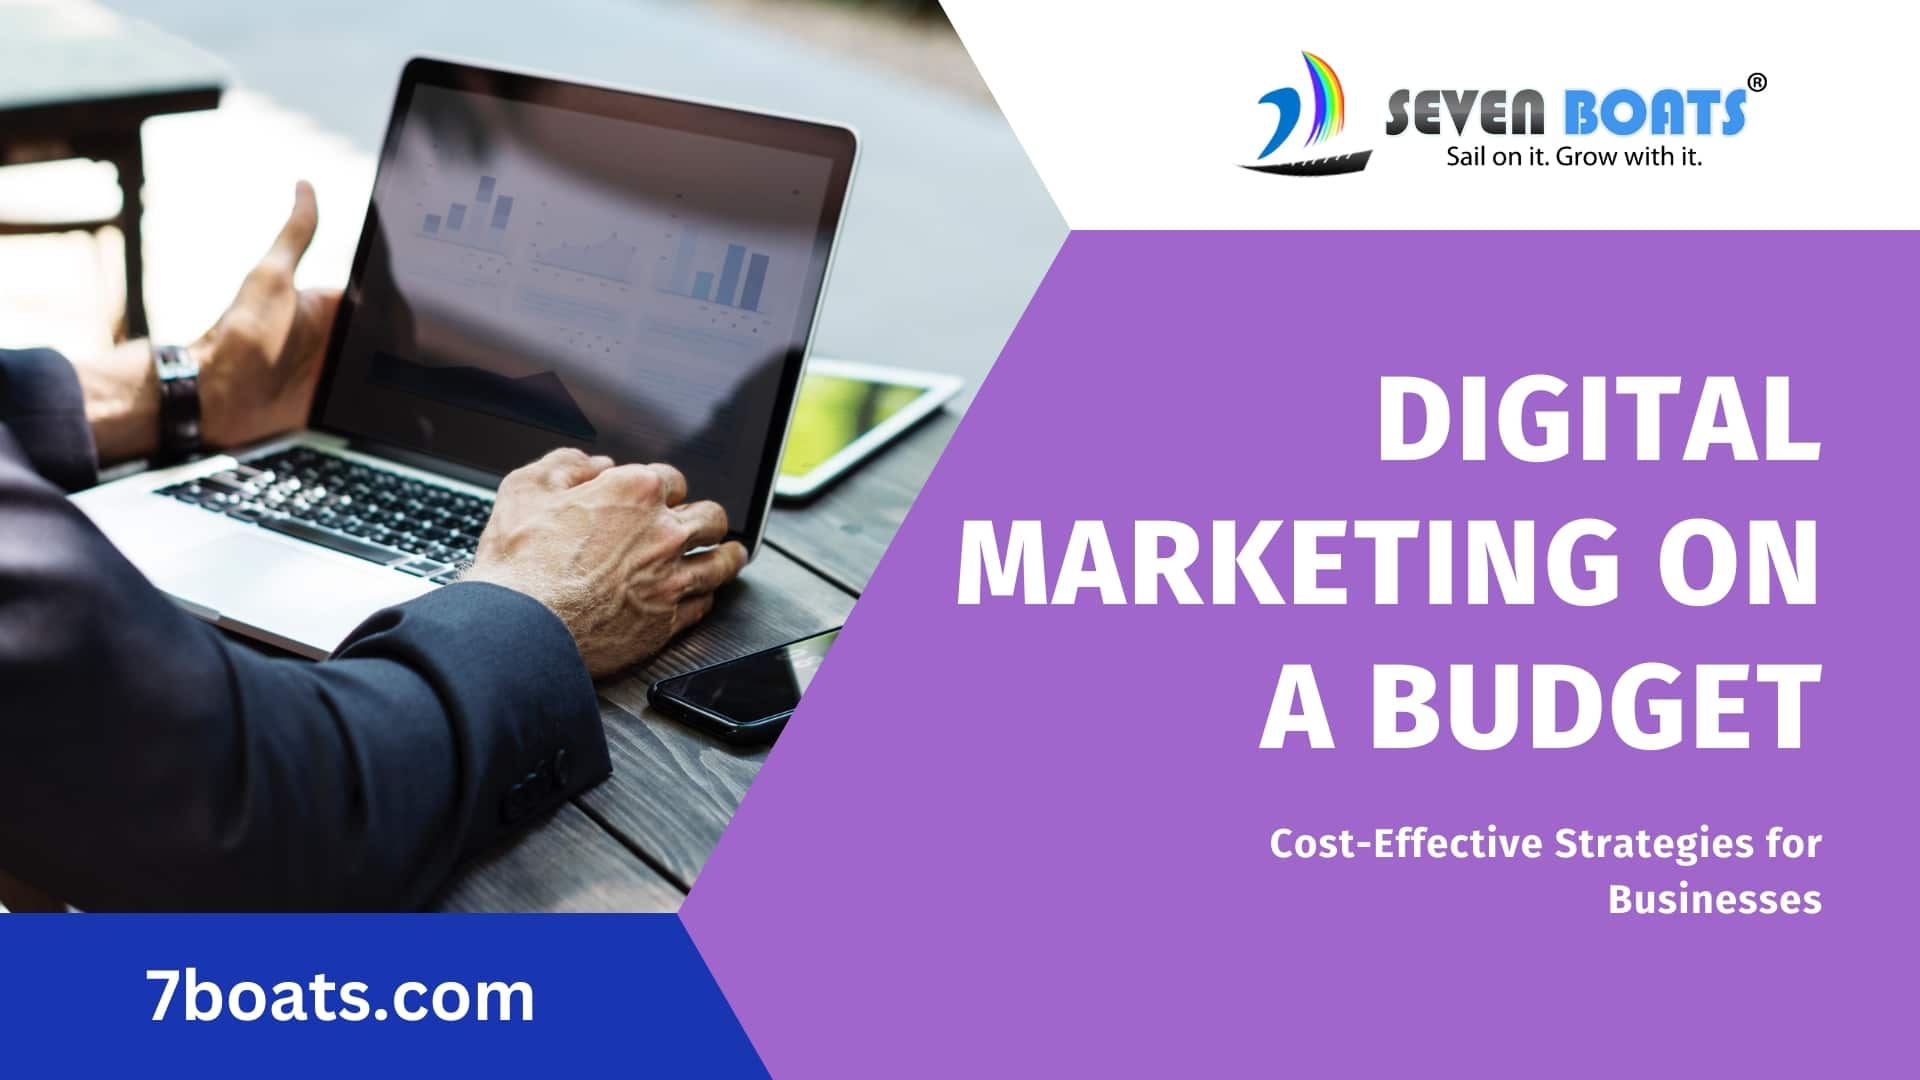 digital marketing on budget - Cost effective strategies for businesses